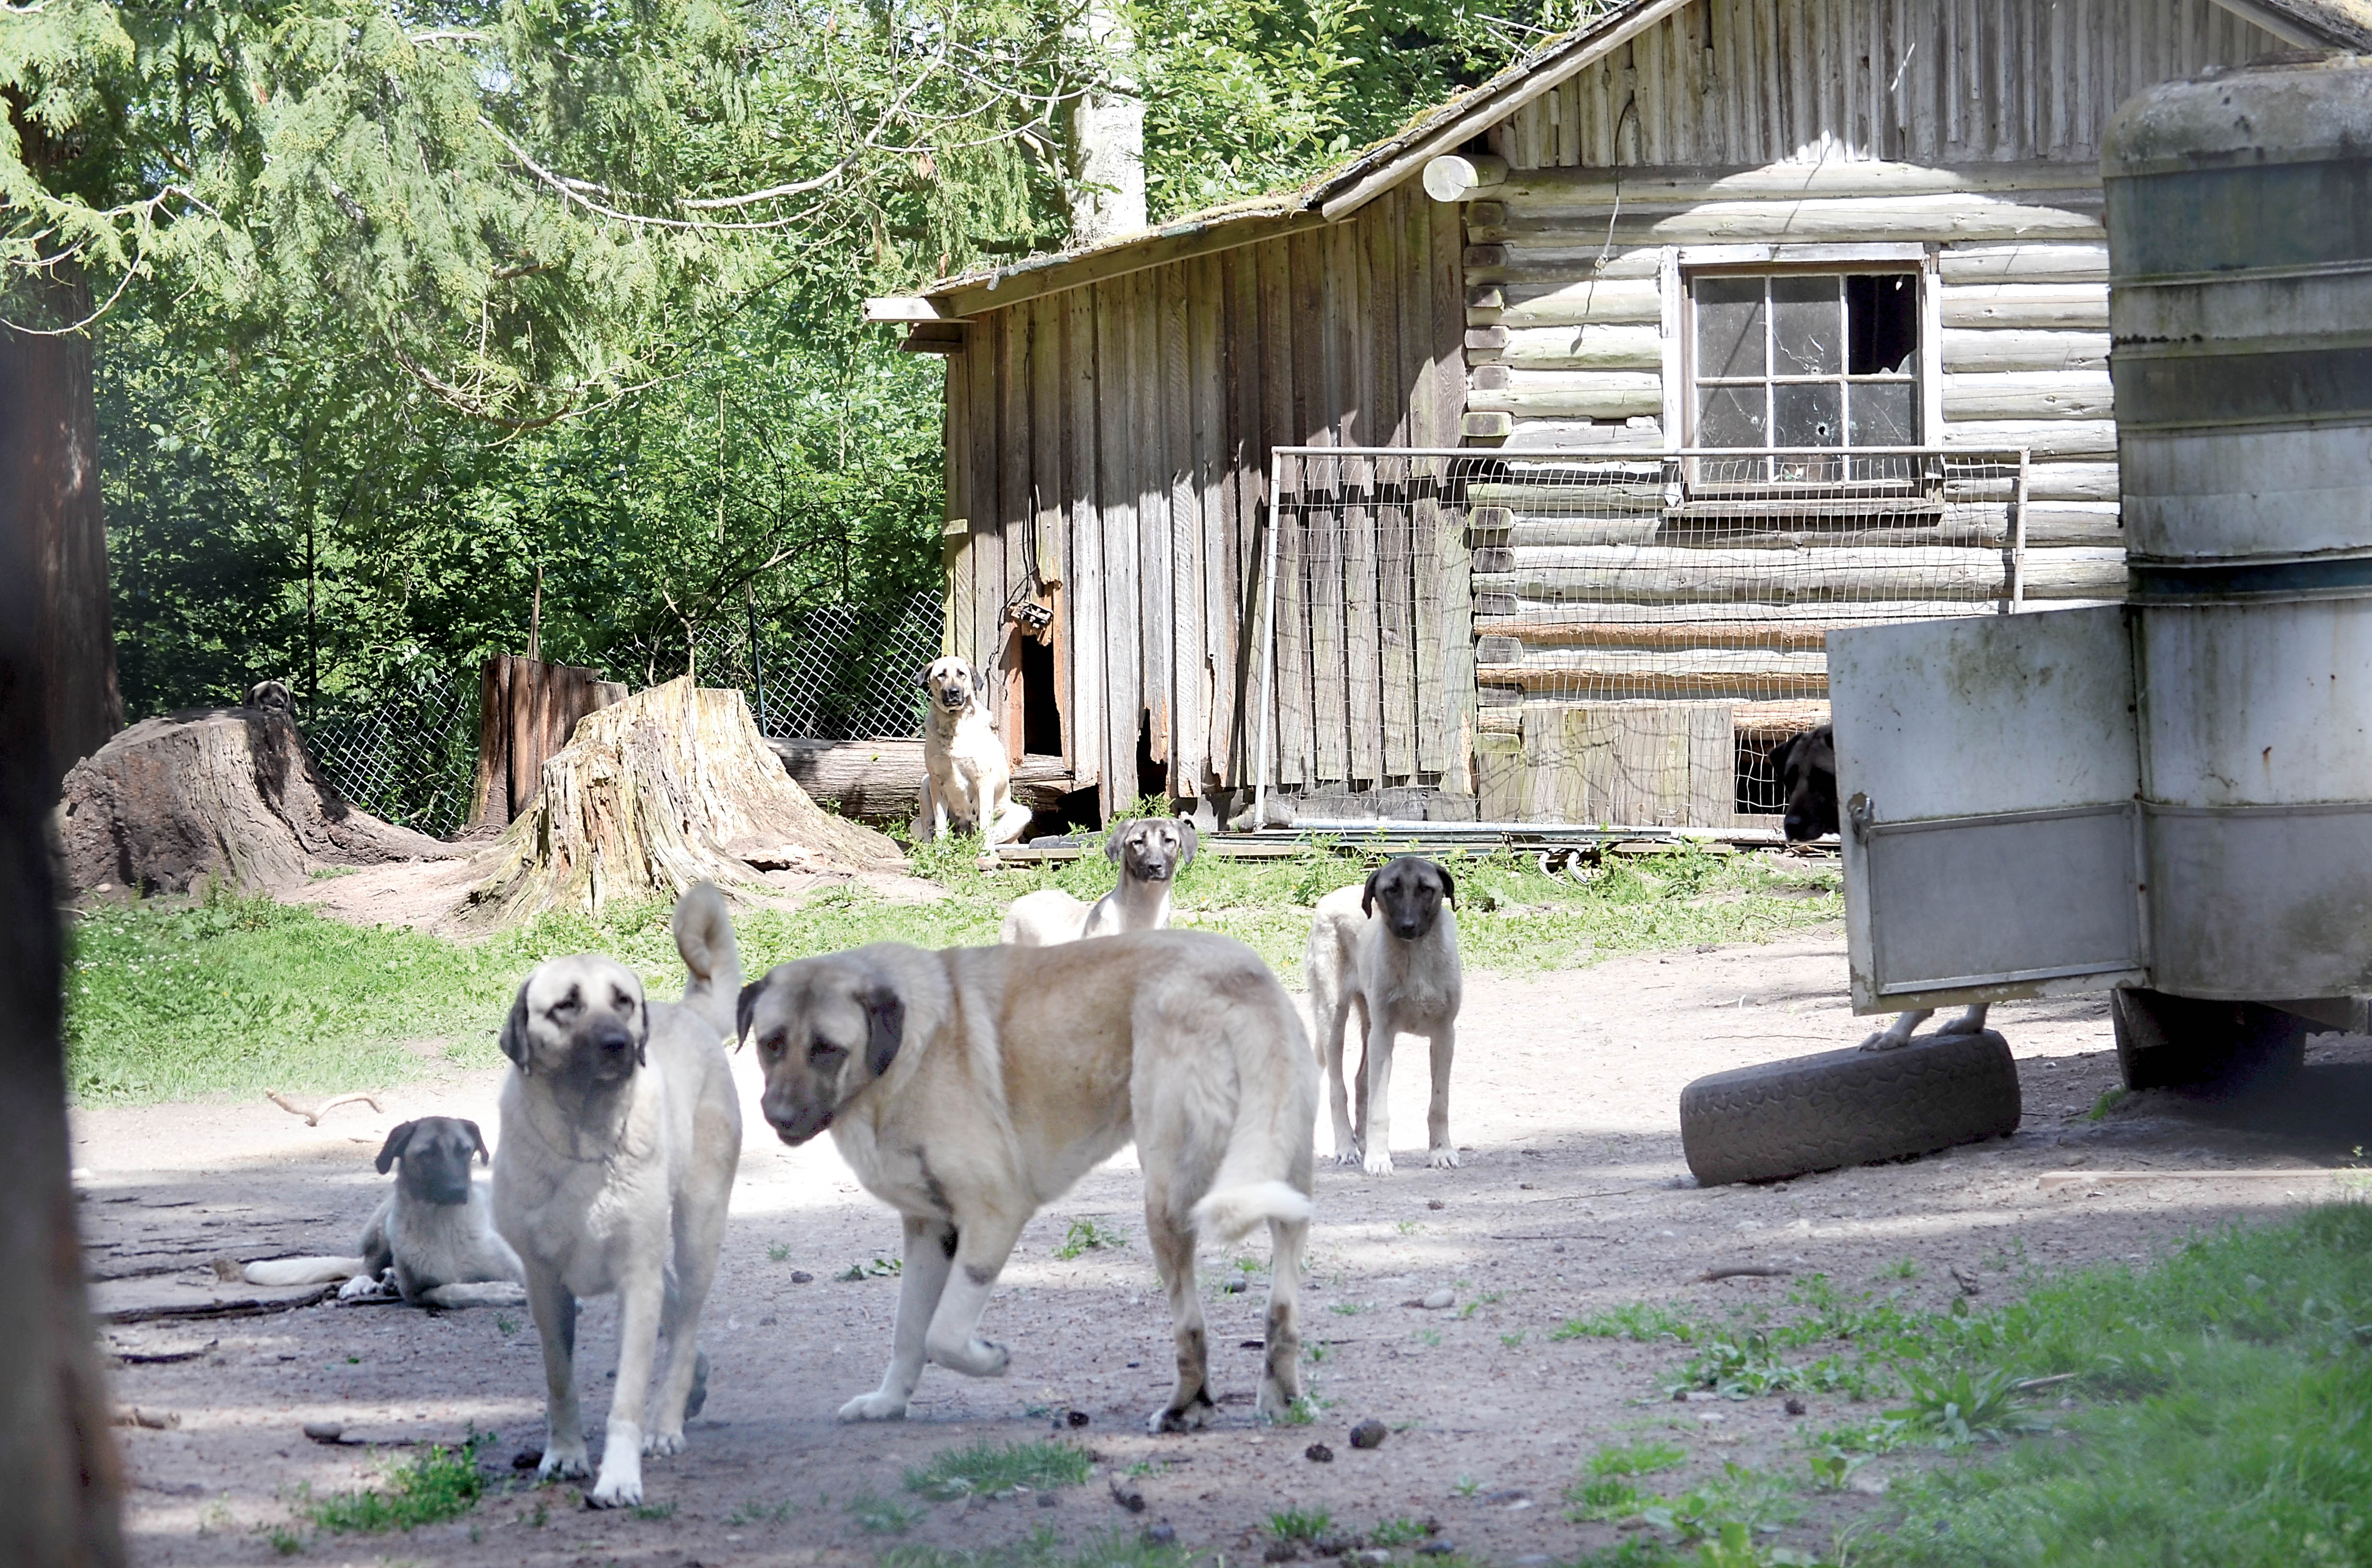 Dogs identified as Anatolian shepherds or kangals lived under a shed or cabin before being moved to safer facilities. (Jefferson County Sheriff's Office)